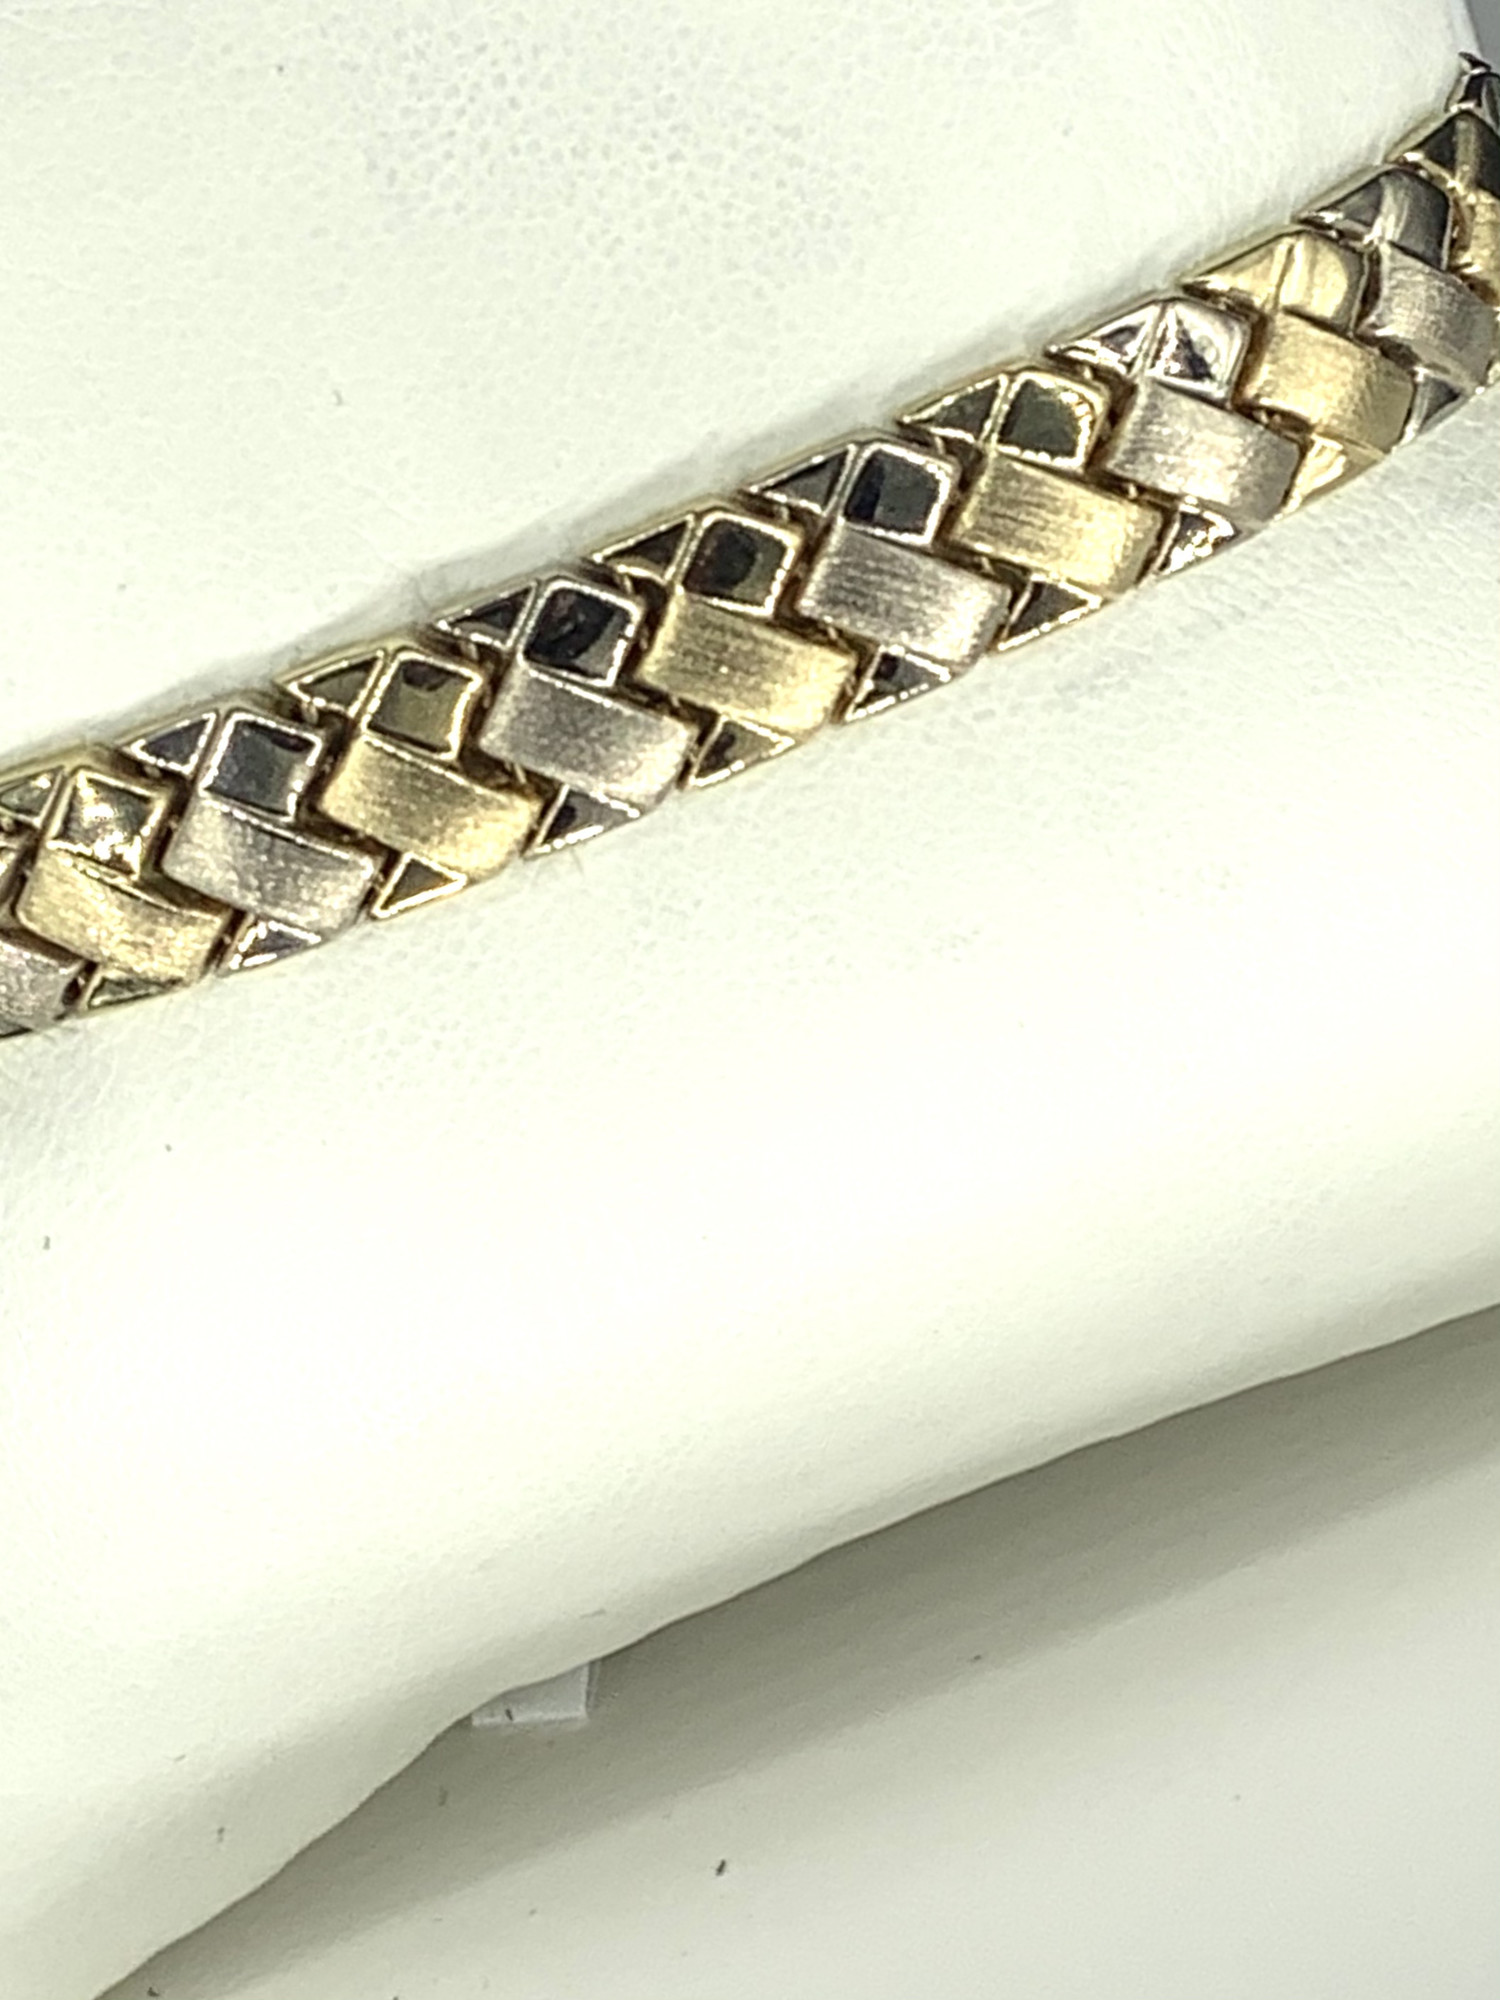 7\" Two Tone White and Yellow Gold
Satin and Polished Link Bracelet
Hidden Clasp with Sagety
Aurafin